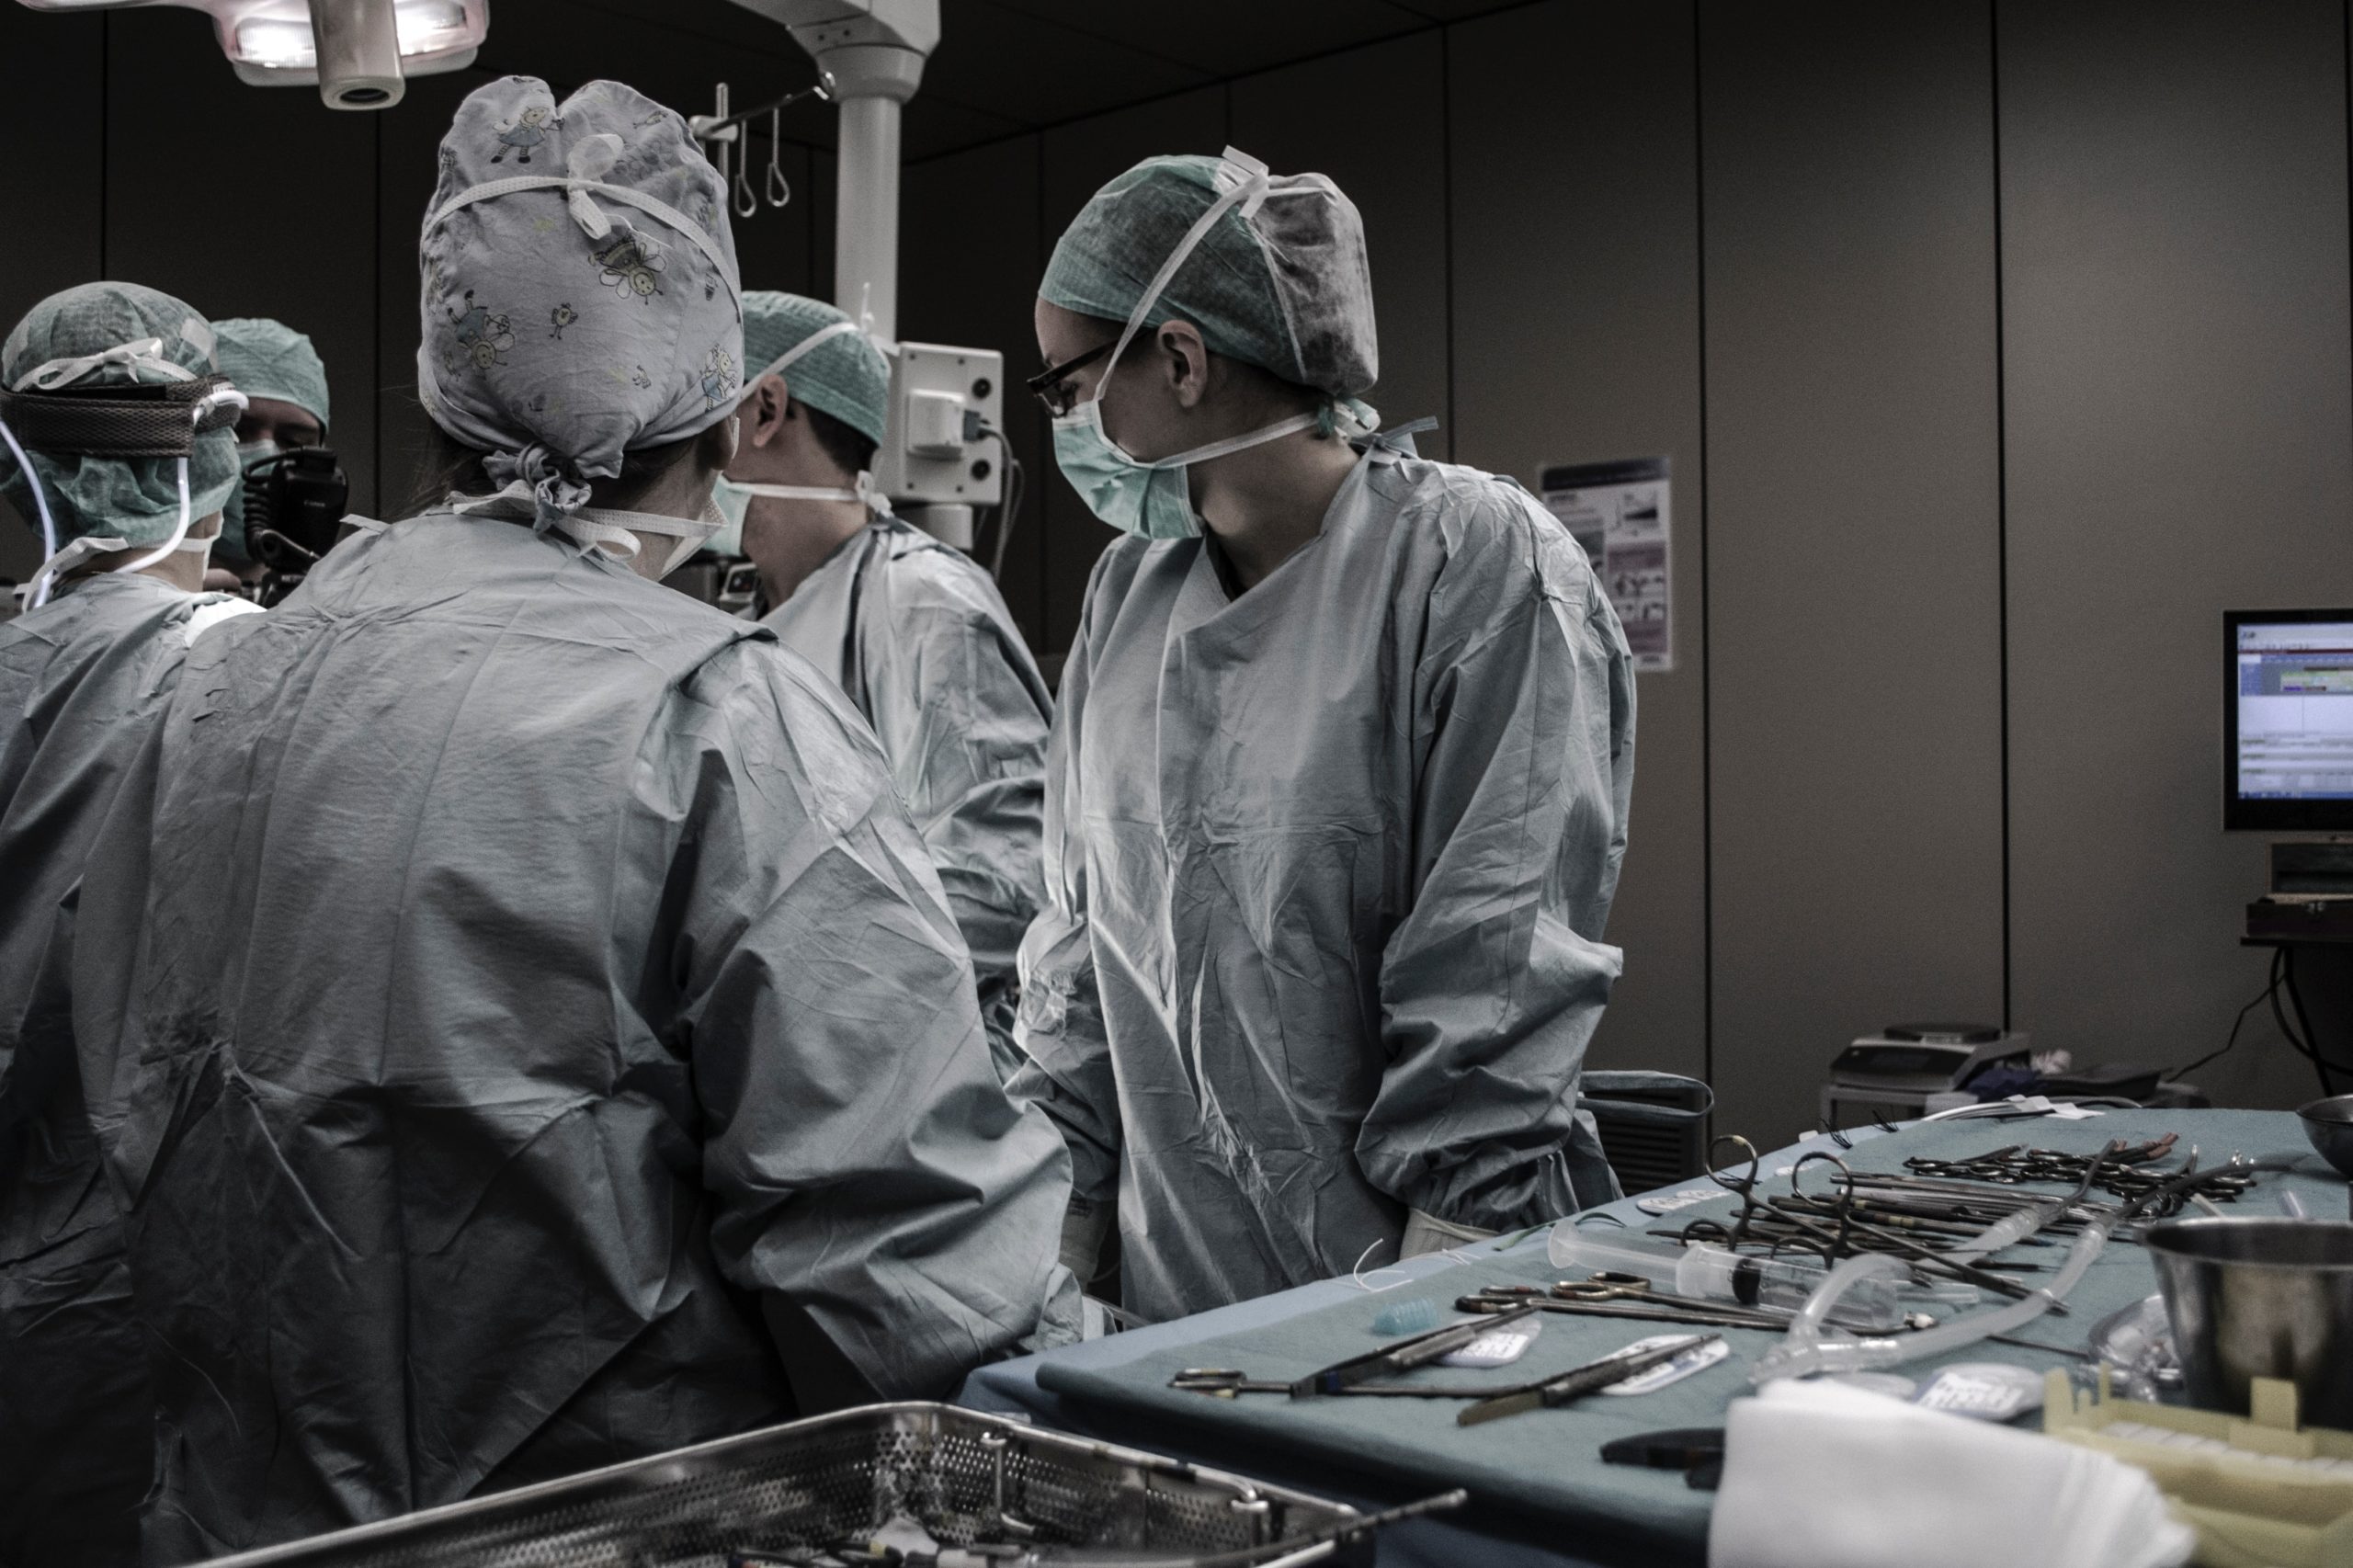 A group of medical professionals stand in an operating room performing a procedure.